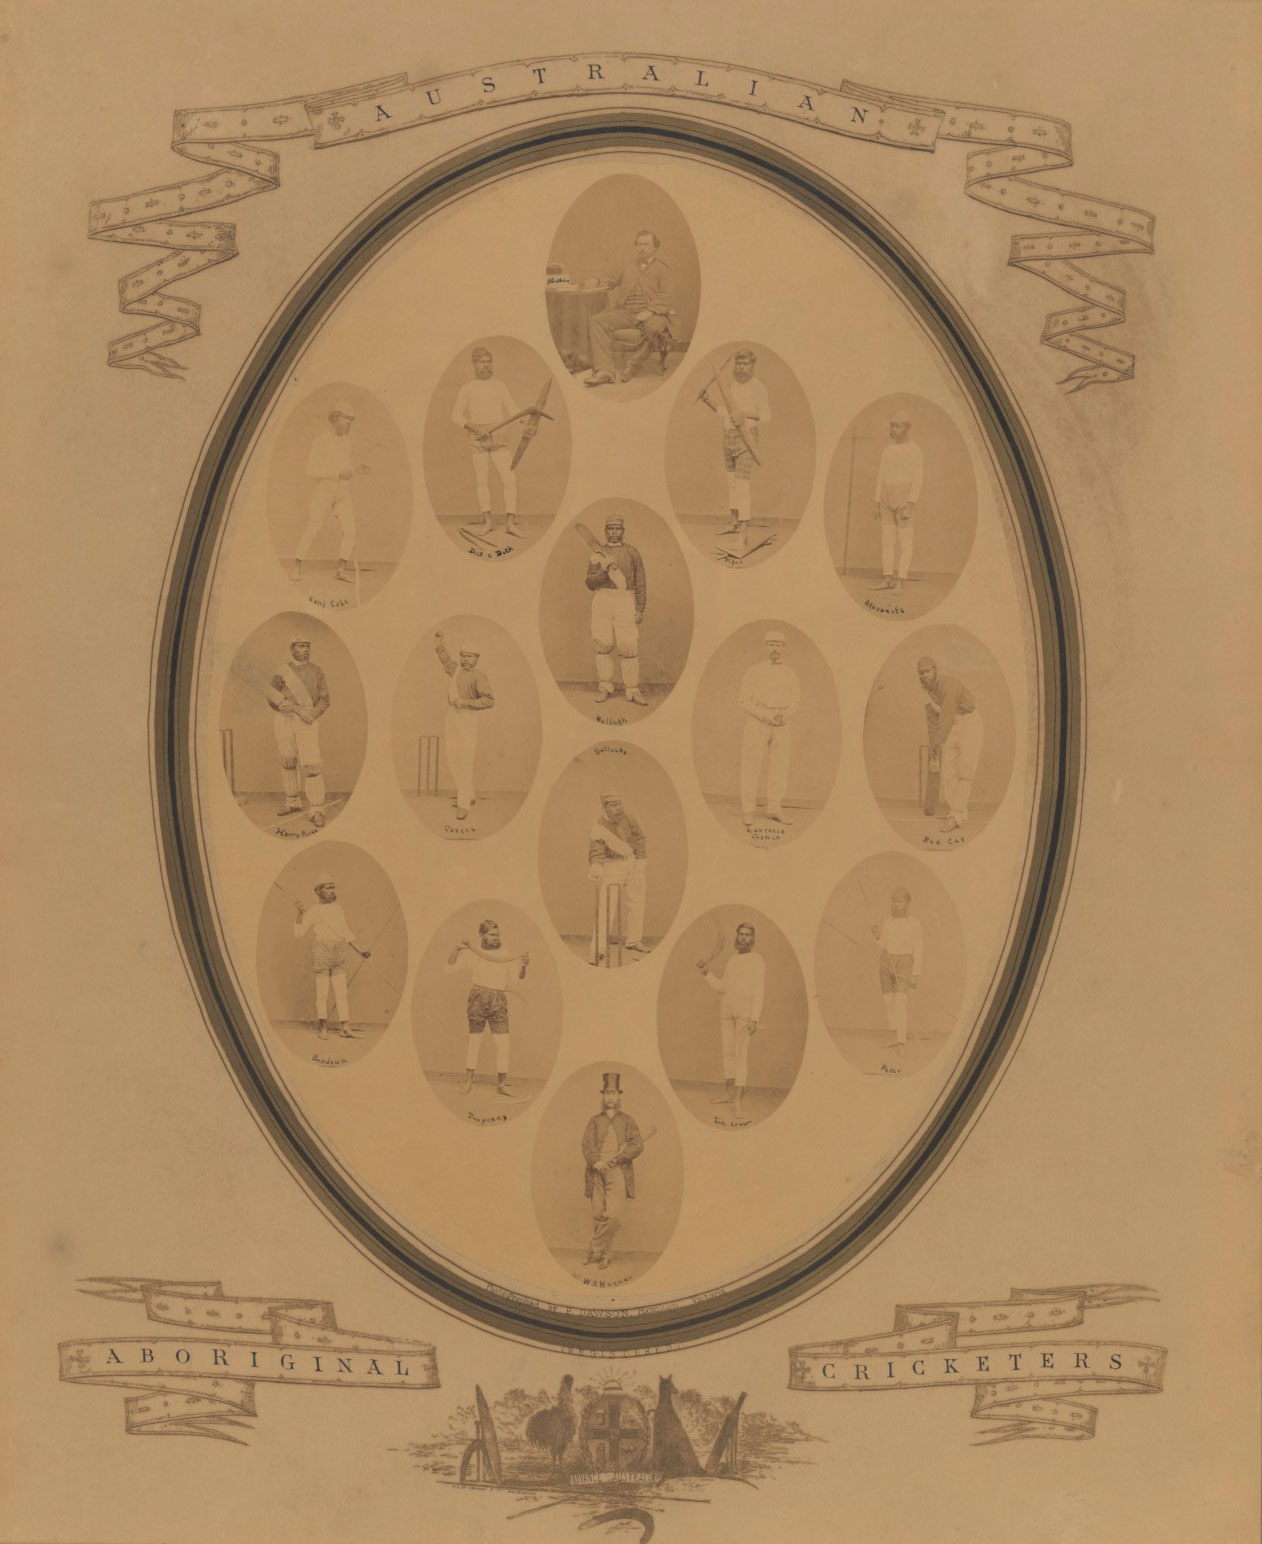 <p>Photo collage by Peter Dawson to promote the 1868 Aboriginal cricket team tour</p>
